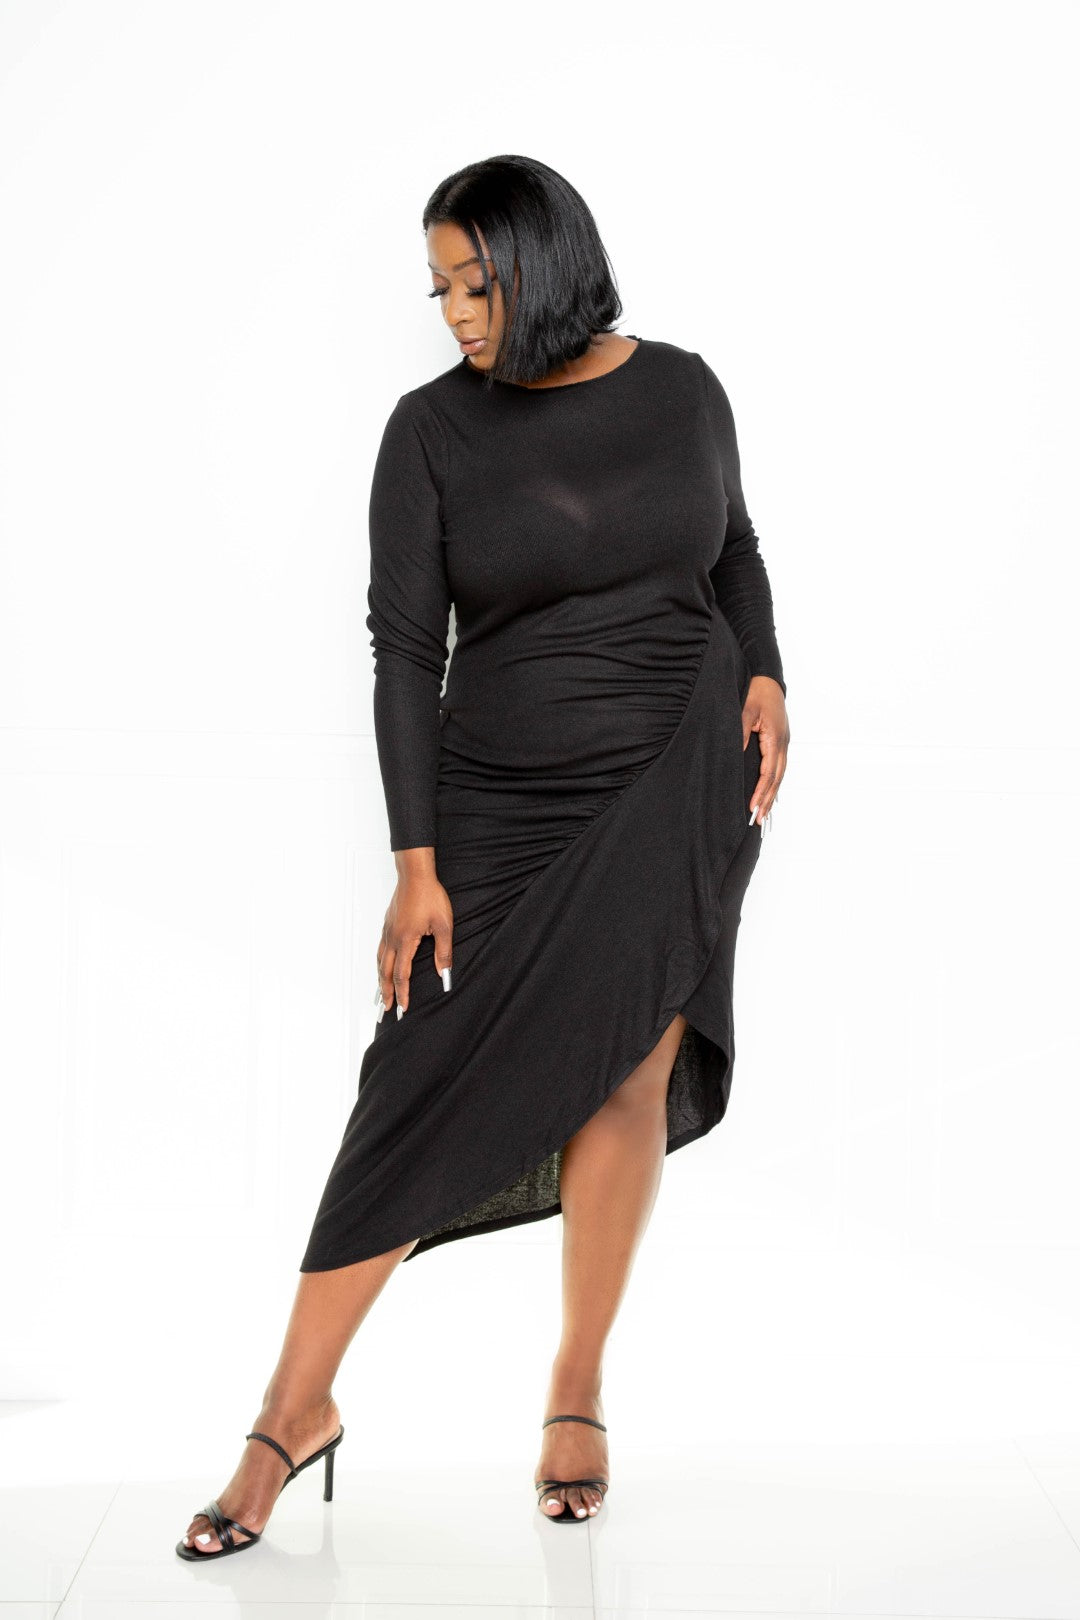 Asymmetrical Sweater Dress With Waterfall Ruffle | Black, Cream, PLUS SIZE, PLUS SIZE DRESSES, SALE, SALE PLUS SIZE | Style Your Curves